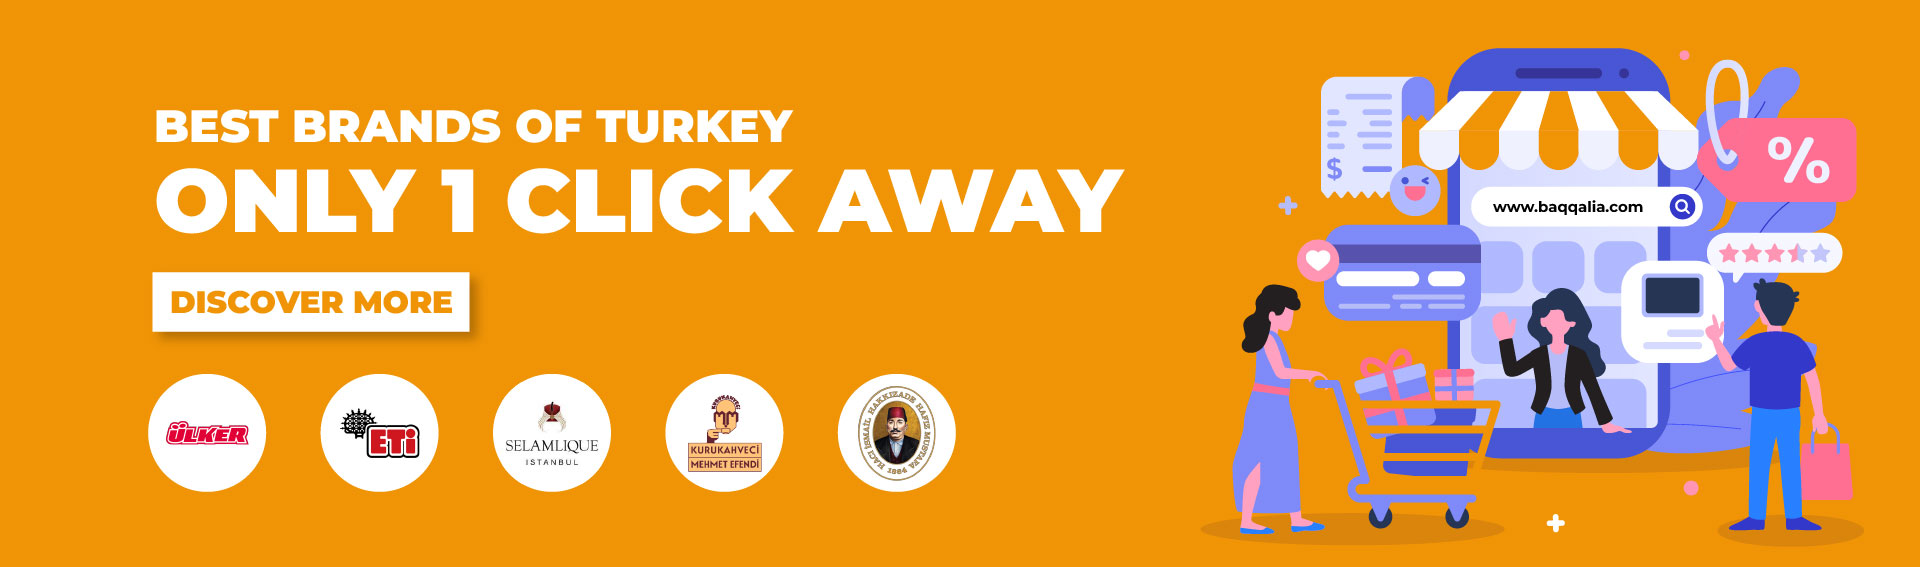 Best Brands of Turkey Only 1 Click Away